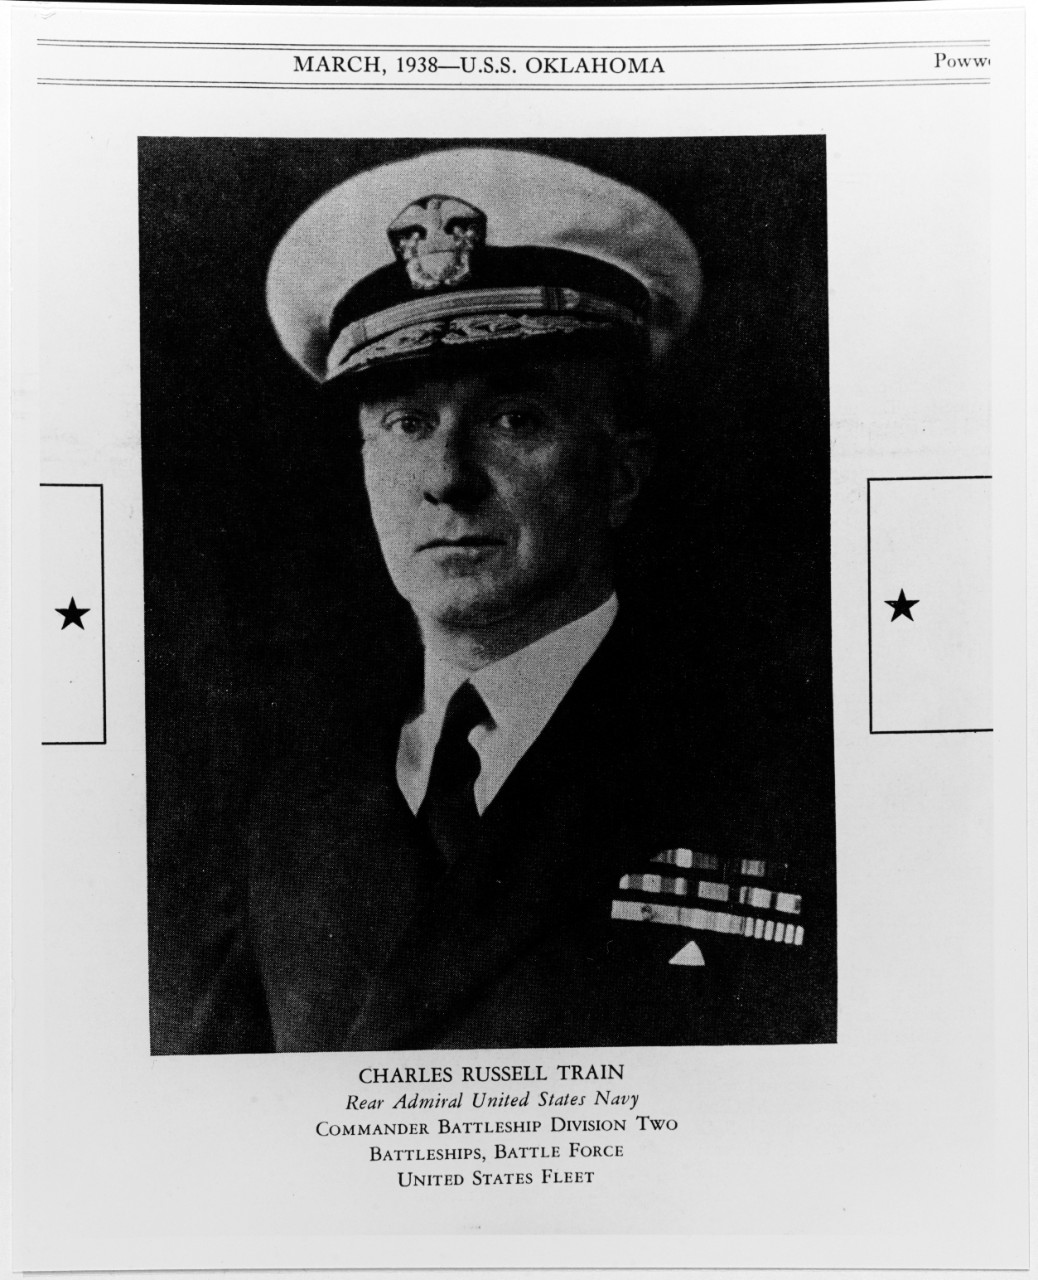 Rear Admiral Charles Russell Train, USN